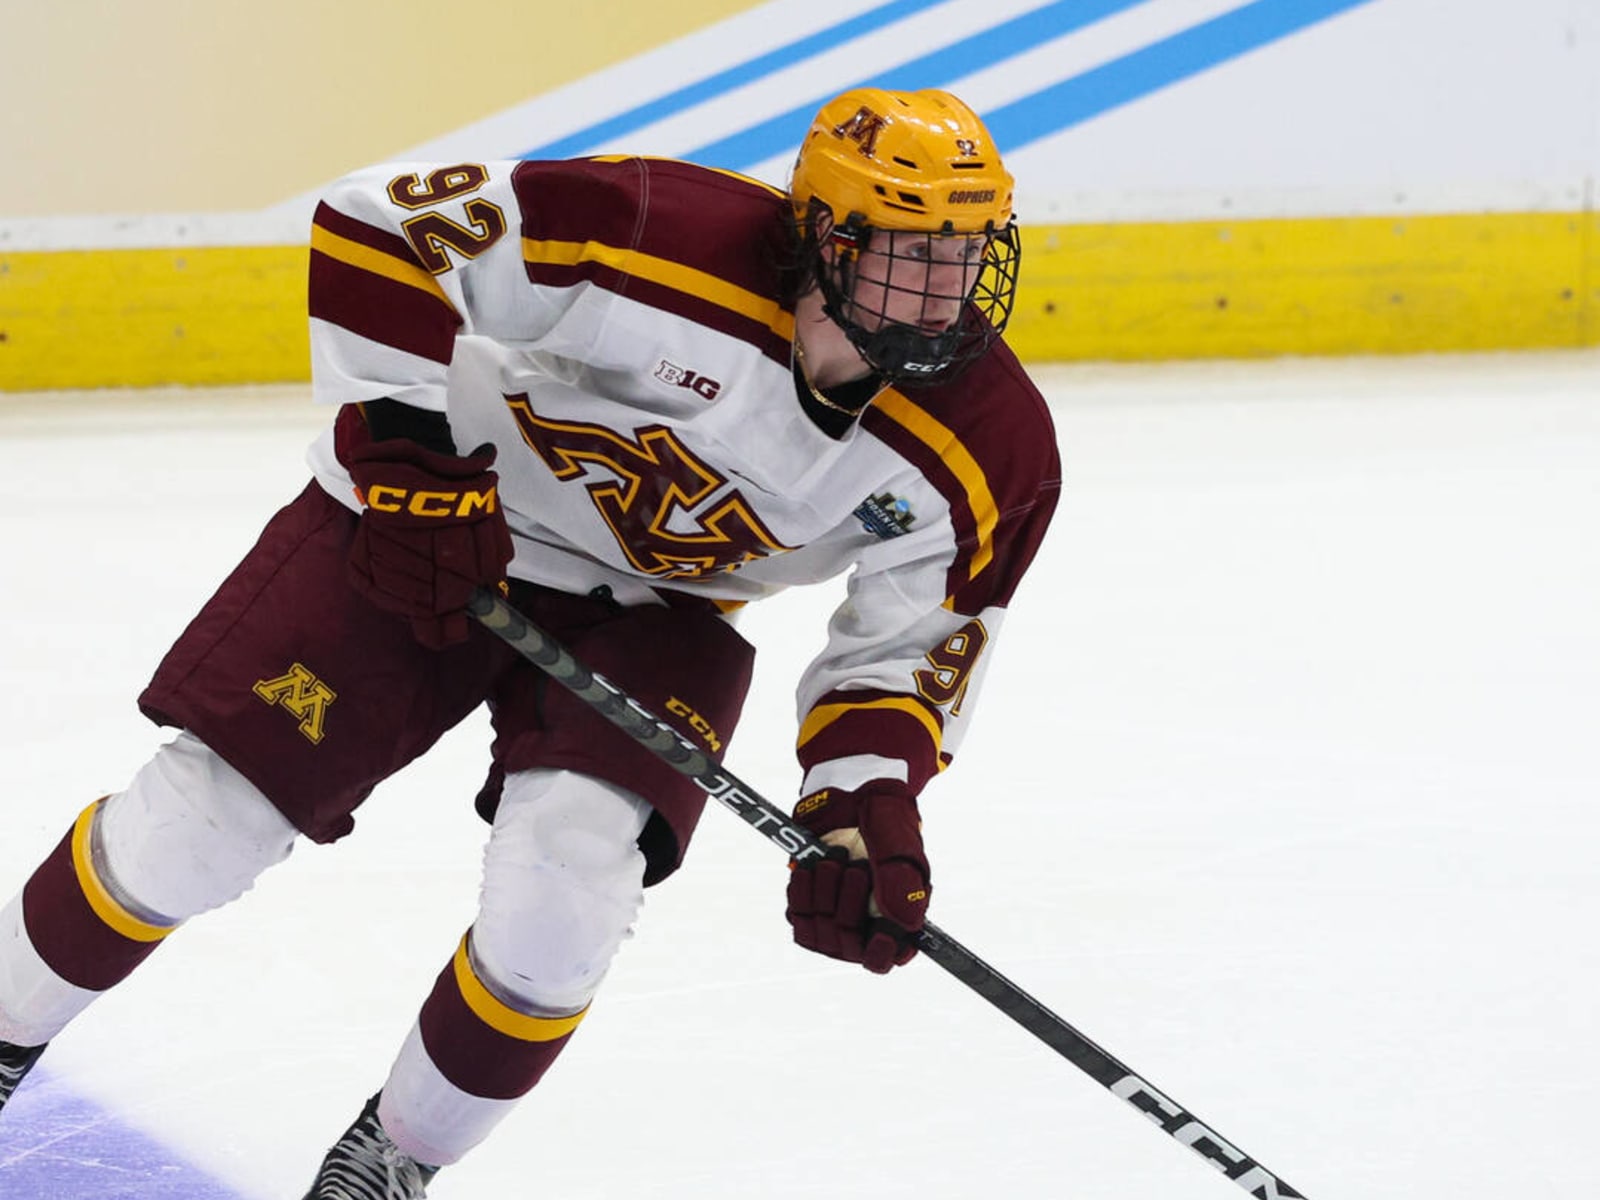 Coyotes prospect Logan Cooley had an unlikely journey to the NHL Draft